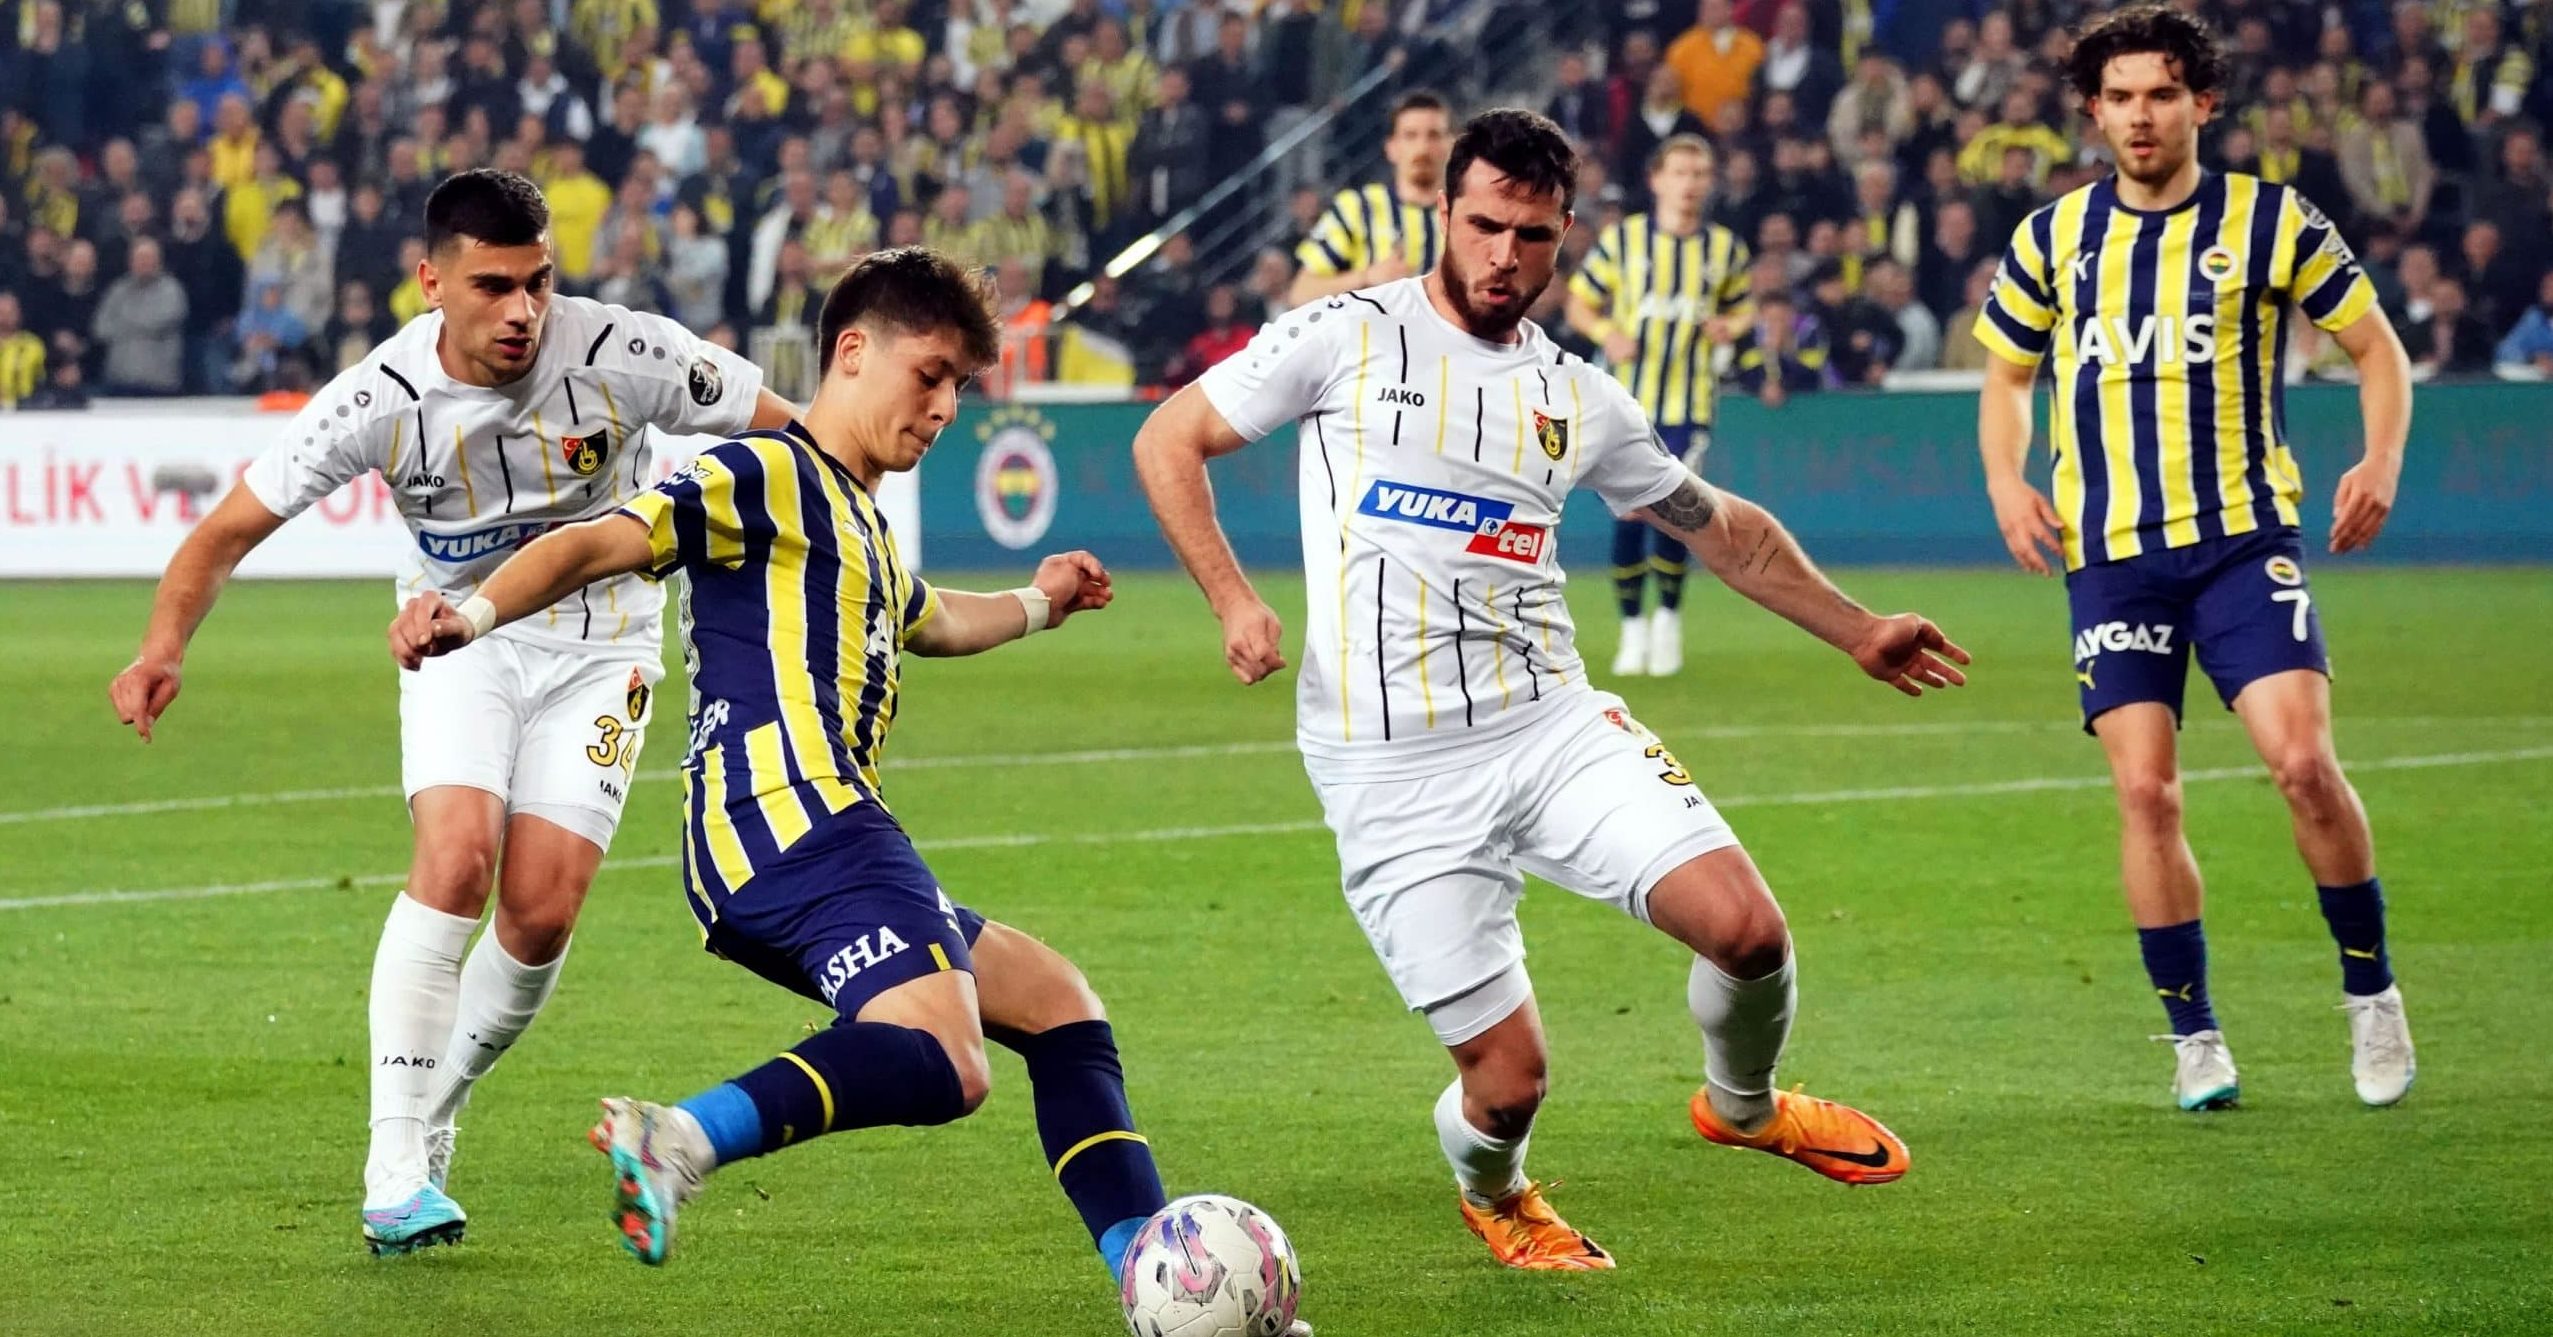 Fenerbahçe vs Zenit: A Clash of Titans on the Football Pitch